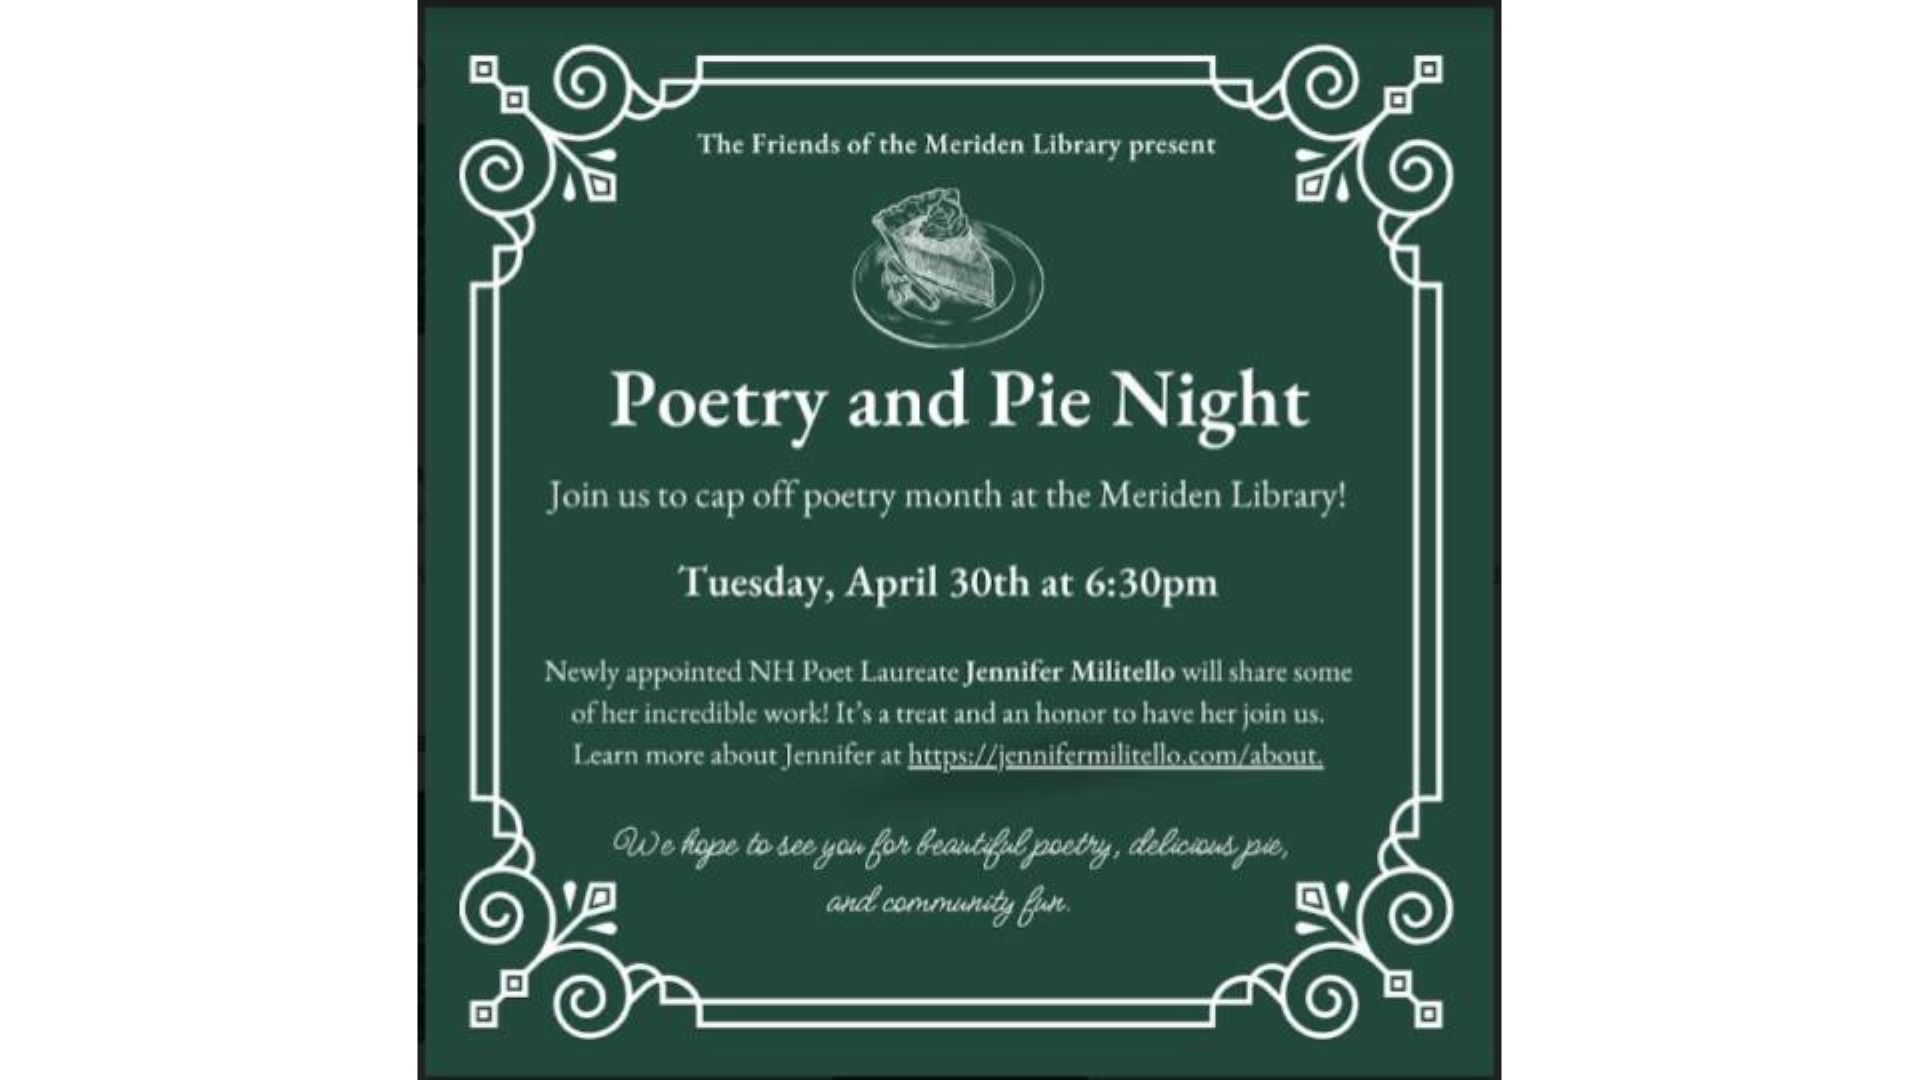 Poetry and Pie Night with the NH Poet Laureate